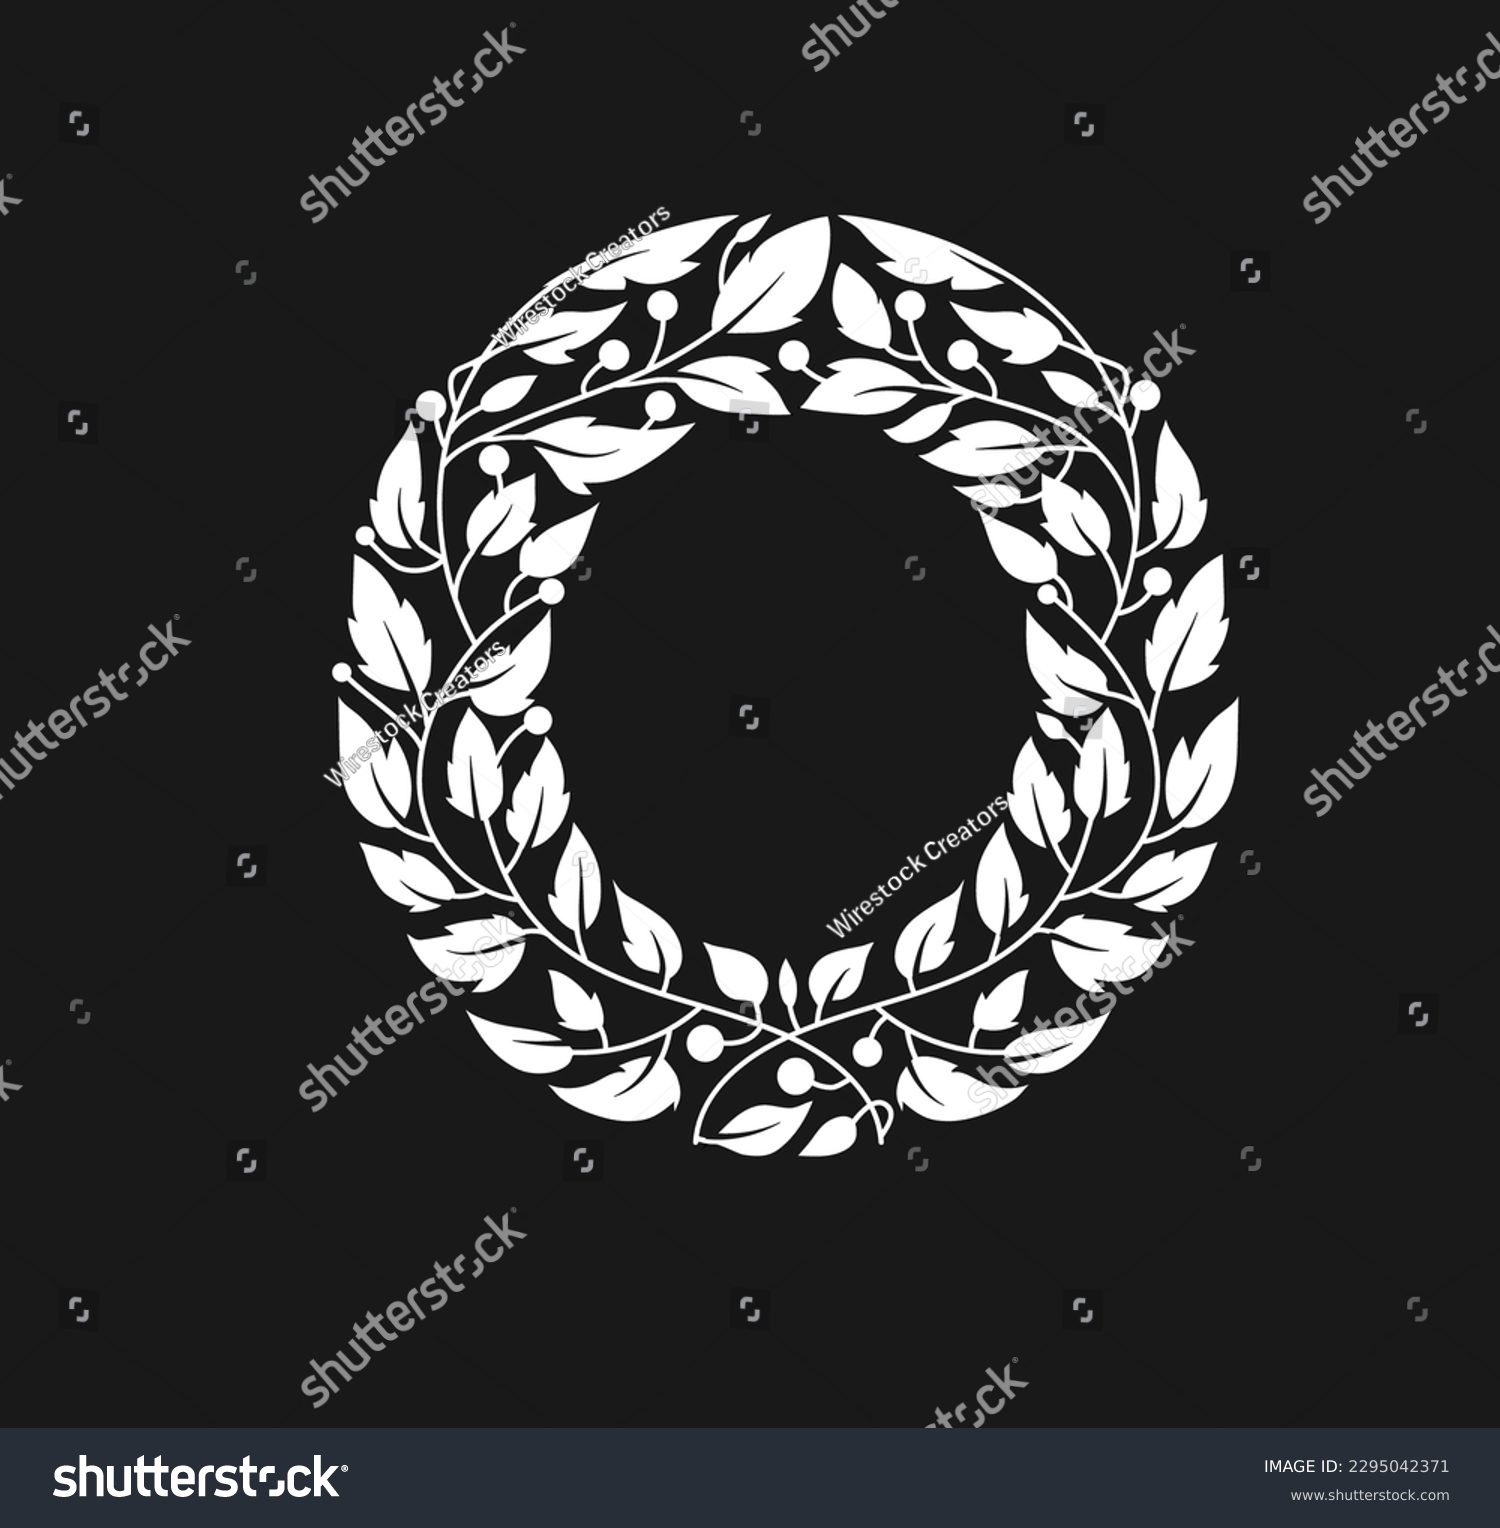 SVG of A white round wreath isolated on a dark background. svg